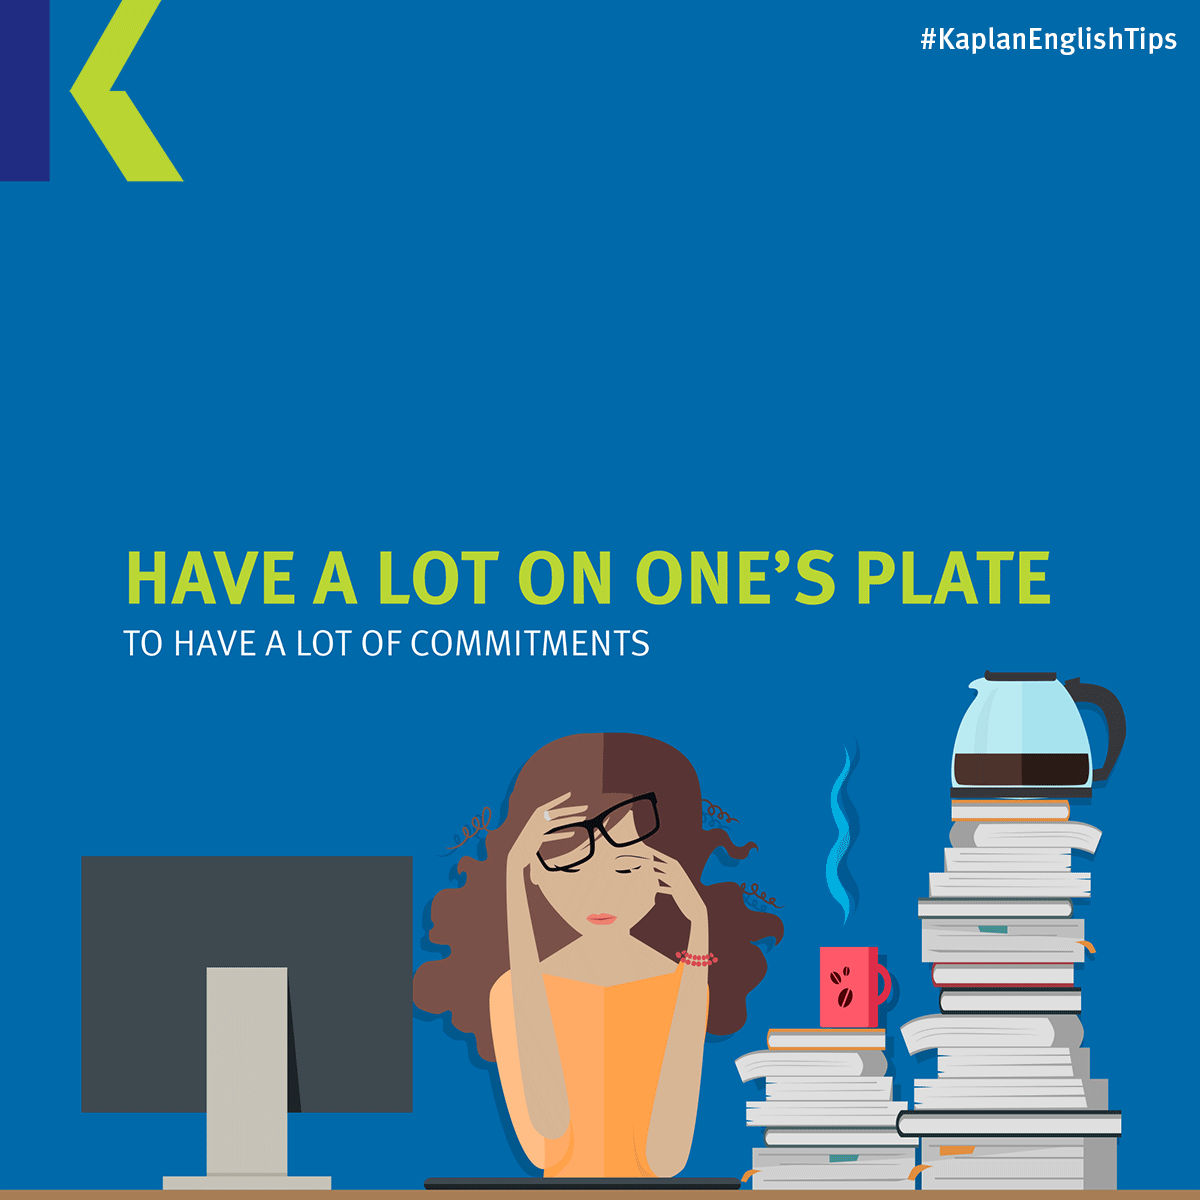 Have a thing going with. Have a lot on the Plate. A lot on one's Plate. Have a lot on my Plate. Have a lot on one's Plate idiom.